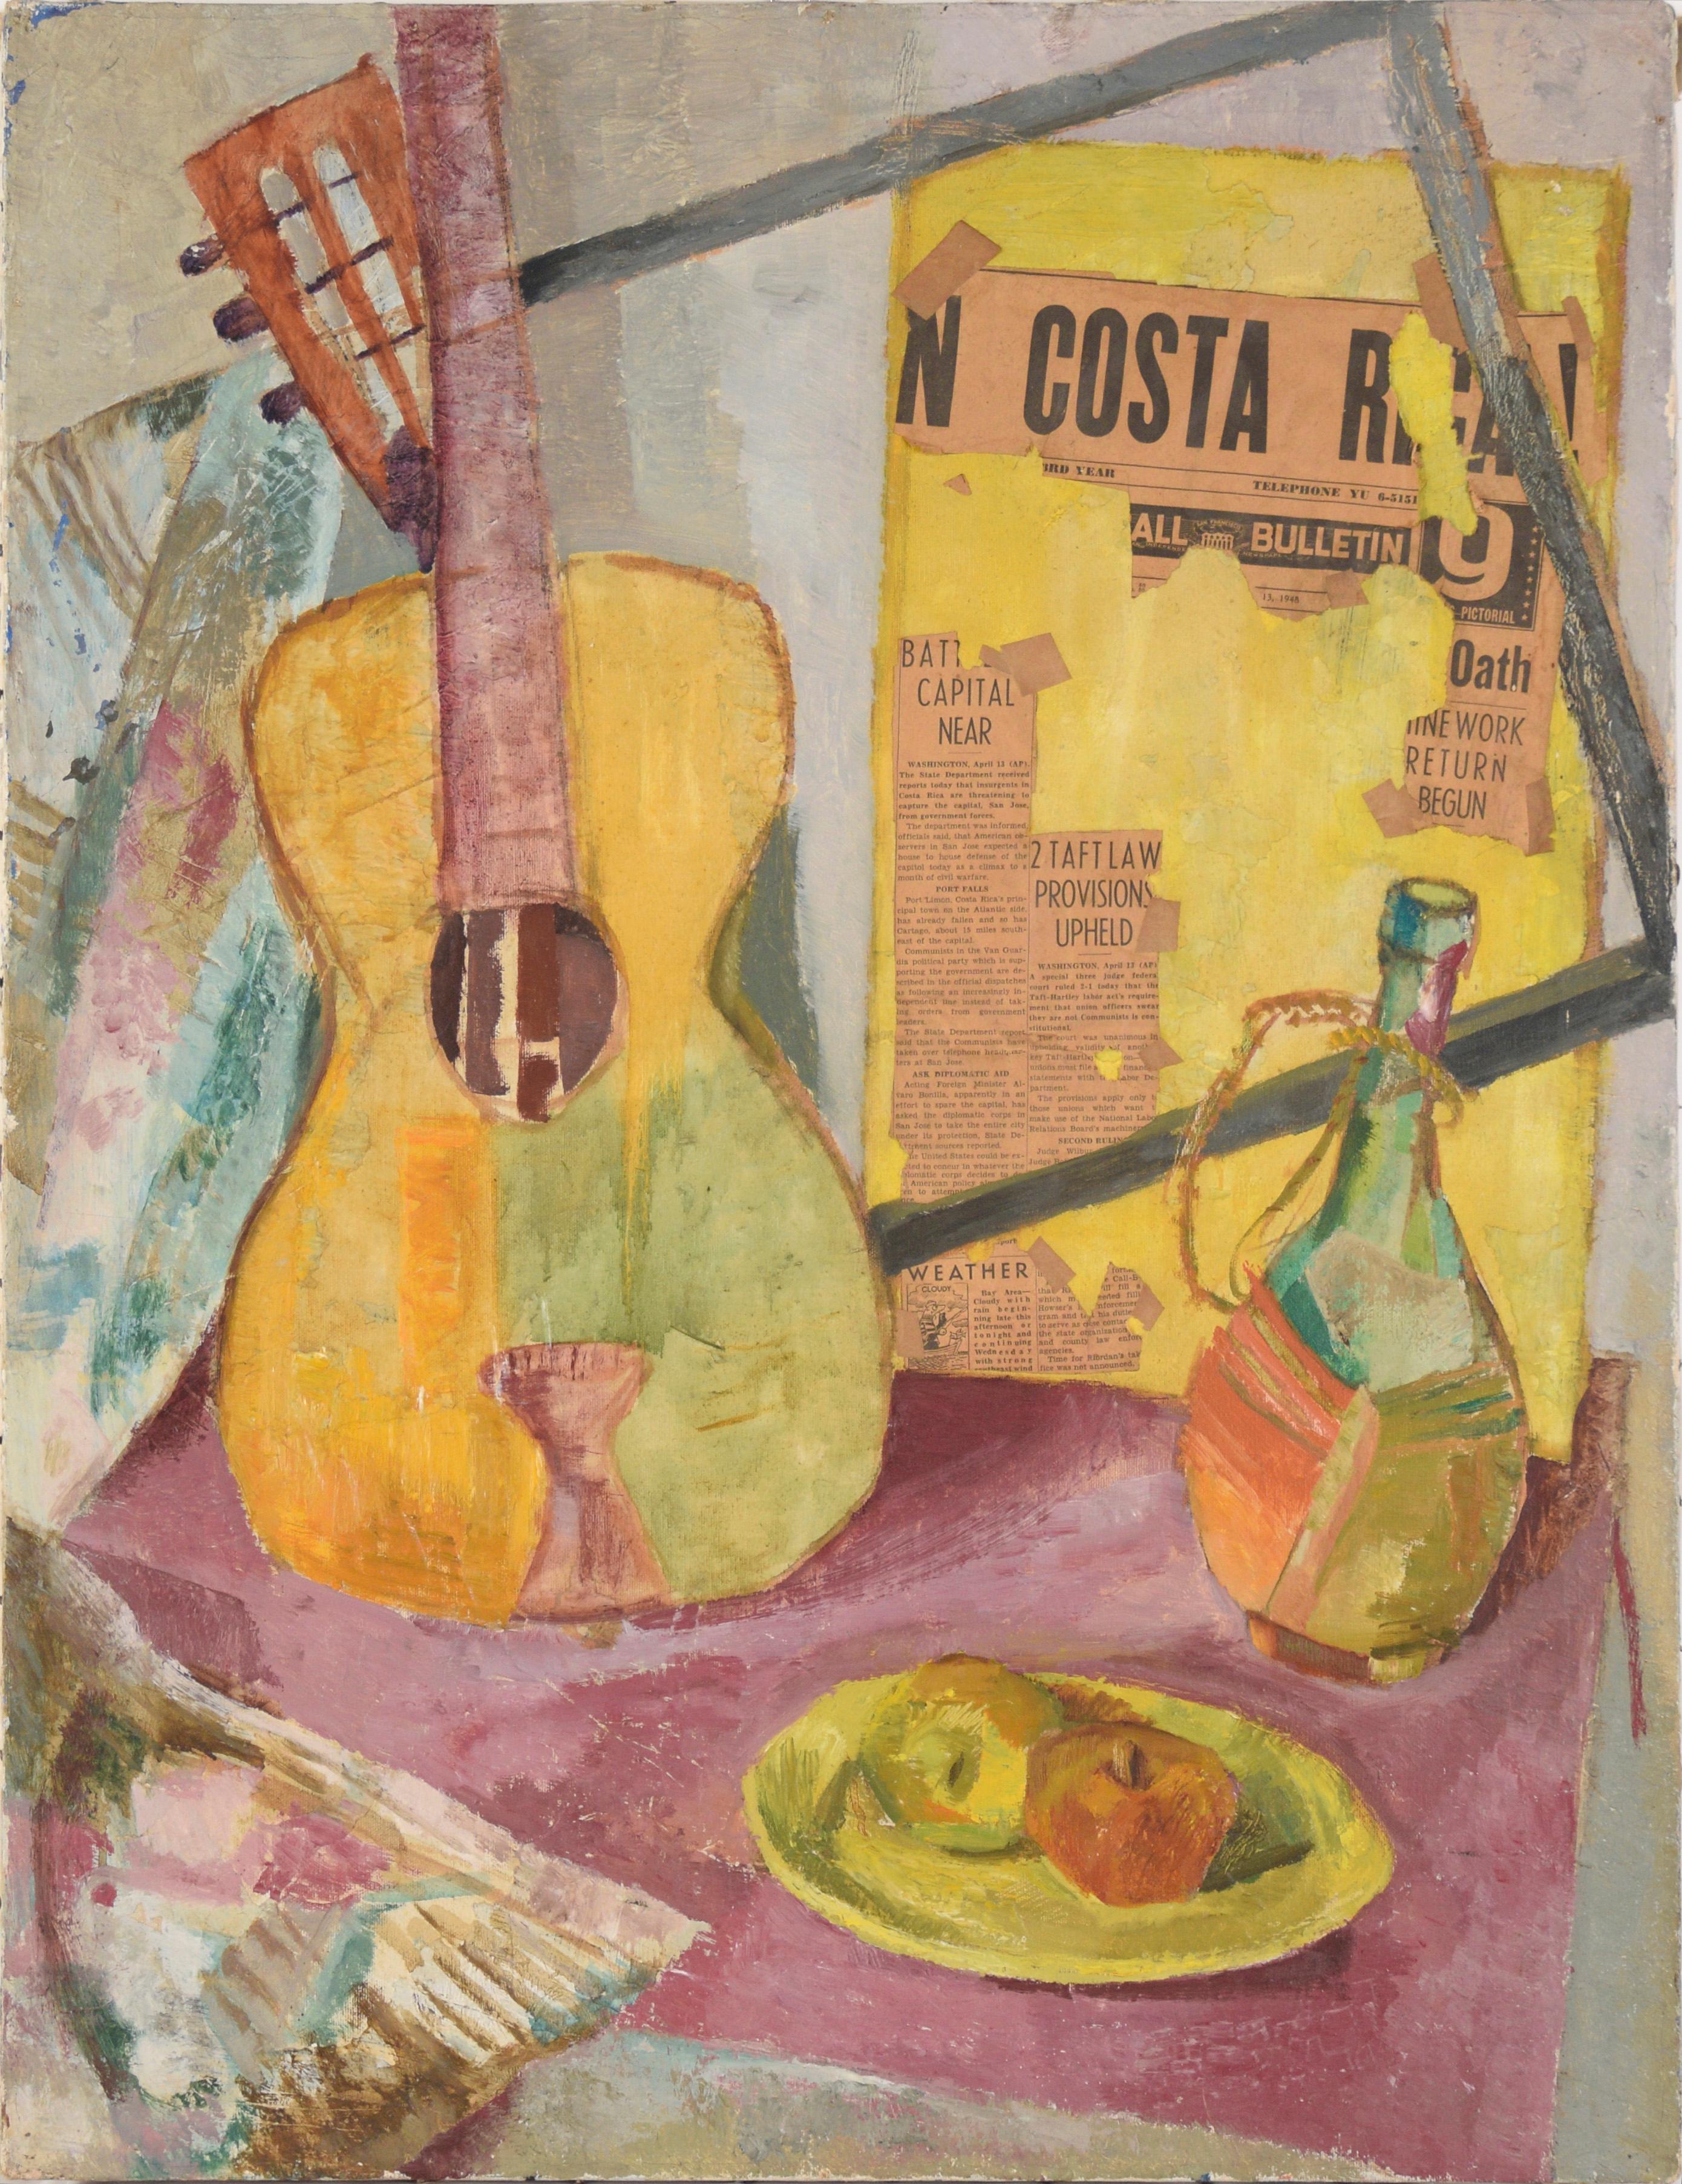 Costa Rica! Still Life with Guitar, Fruit, Wine, and Newsprint in Oil on Canvas